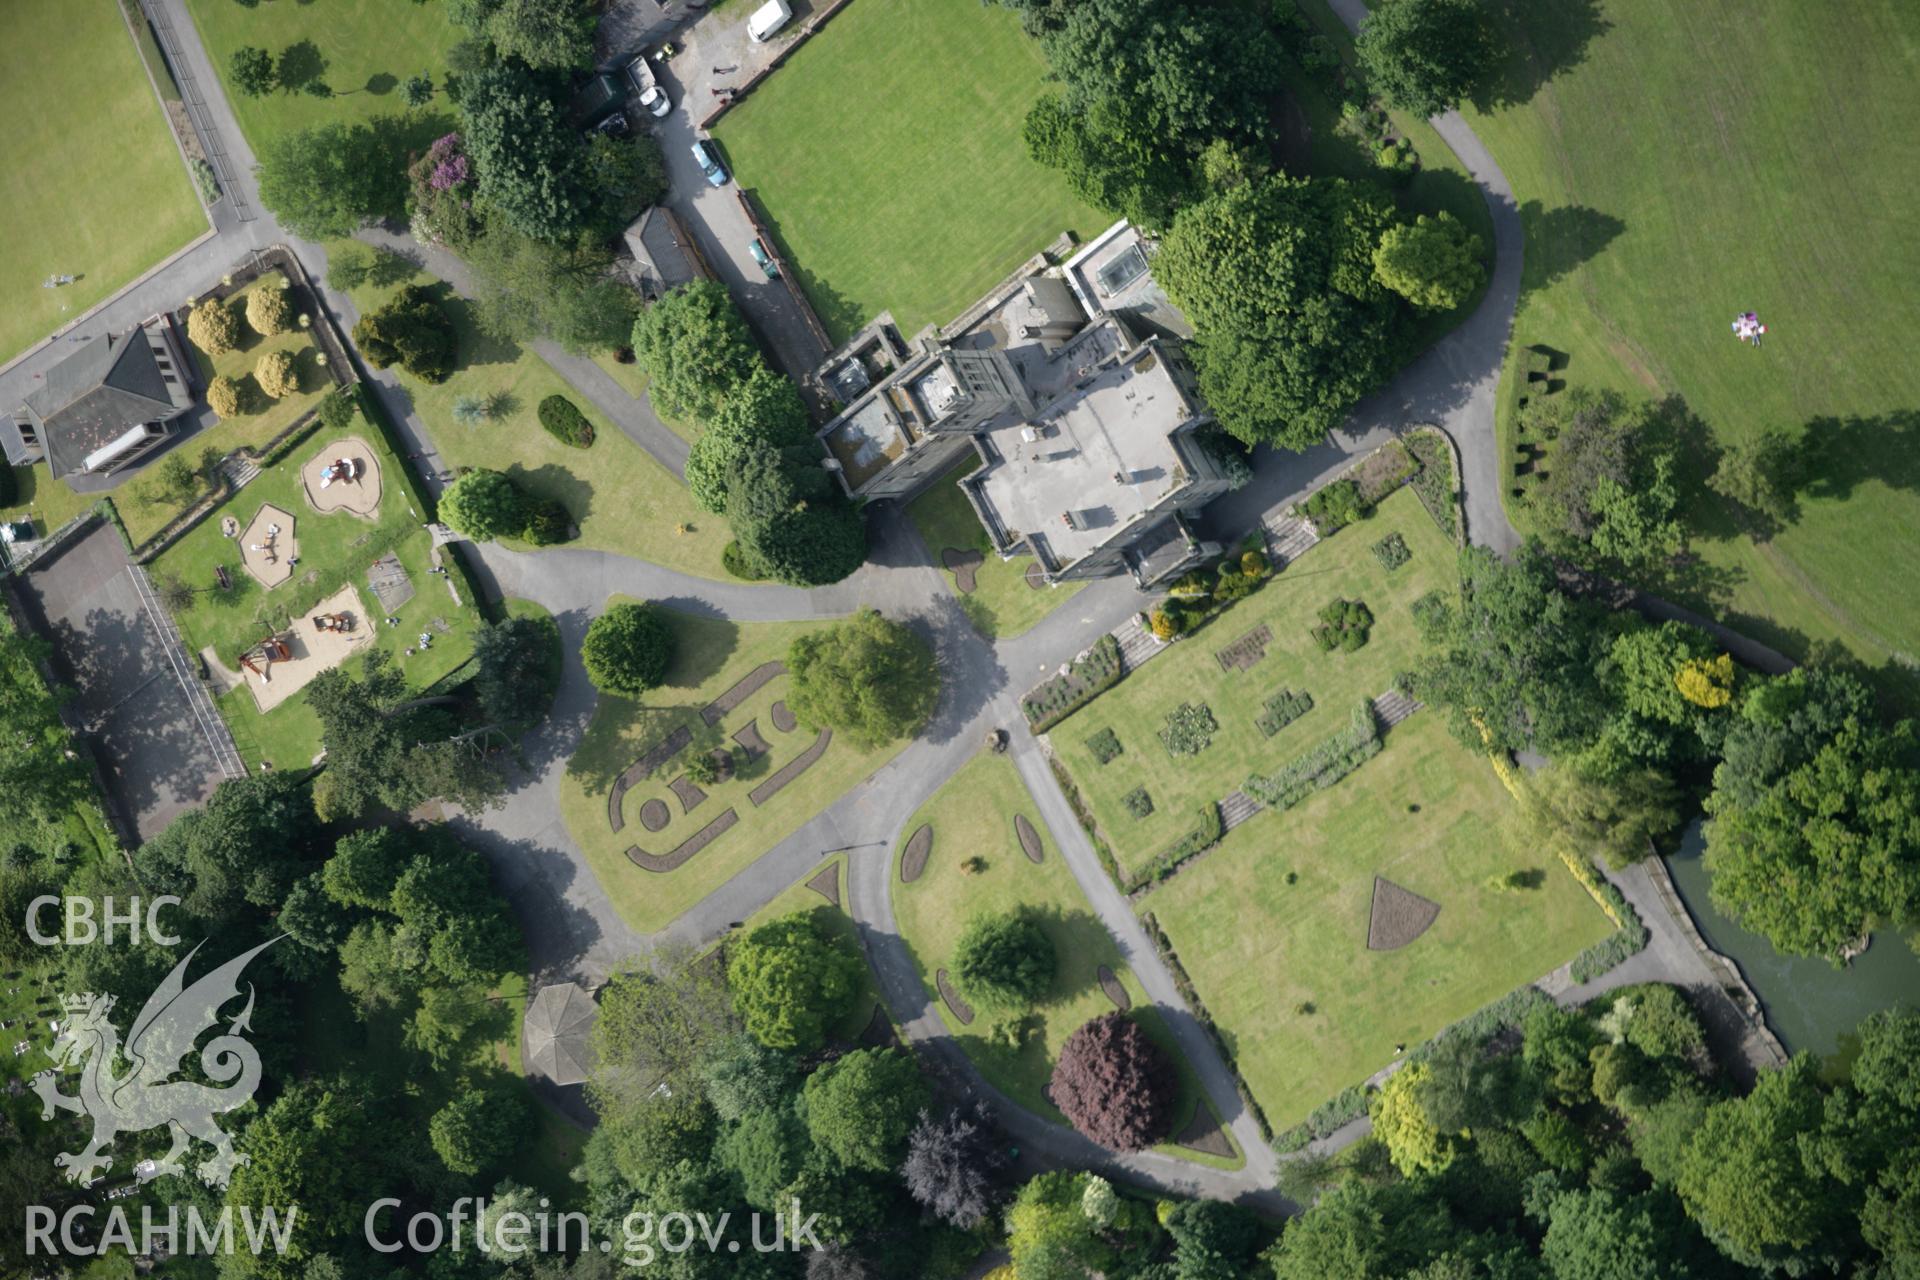 RCAHMW colour oblique aerial photograph of Parc Howard Gardens, Llanelli, viewed from the east. Taken on 09 June 2005 by Toby Driver